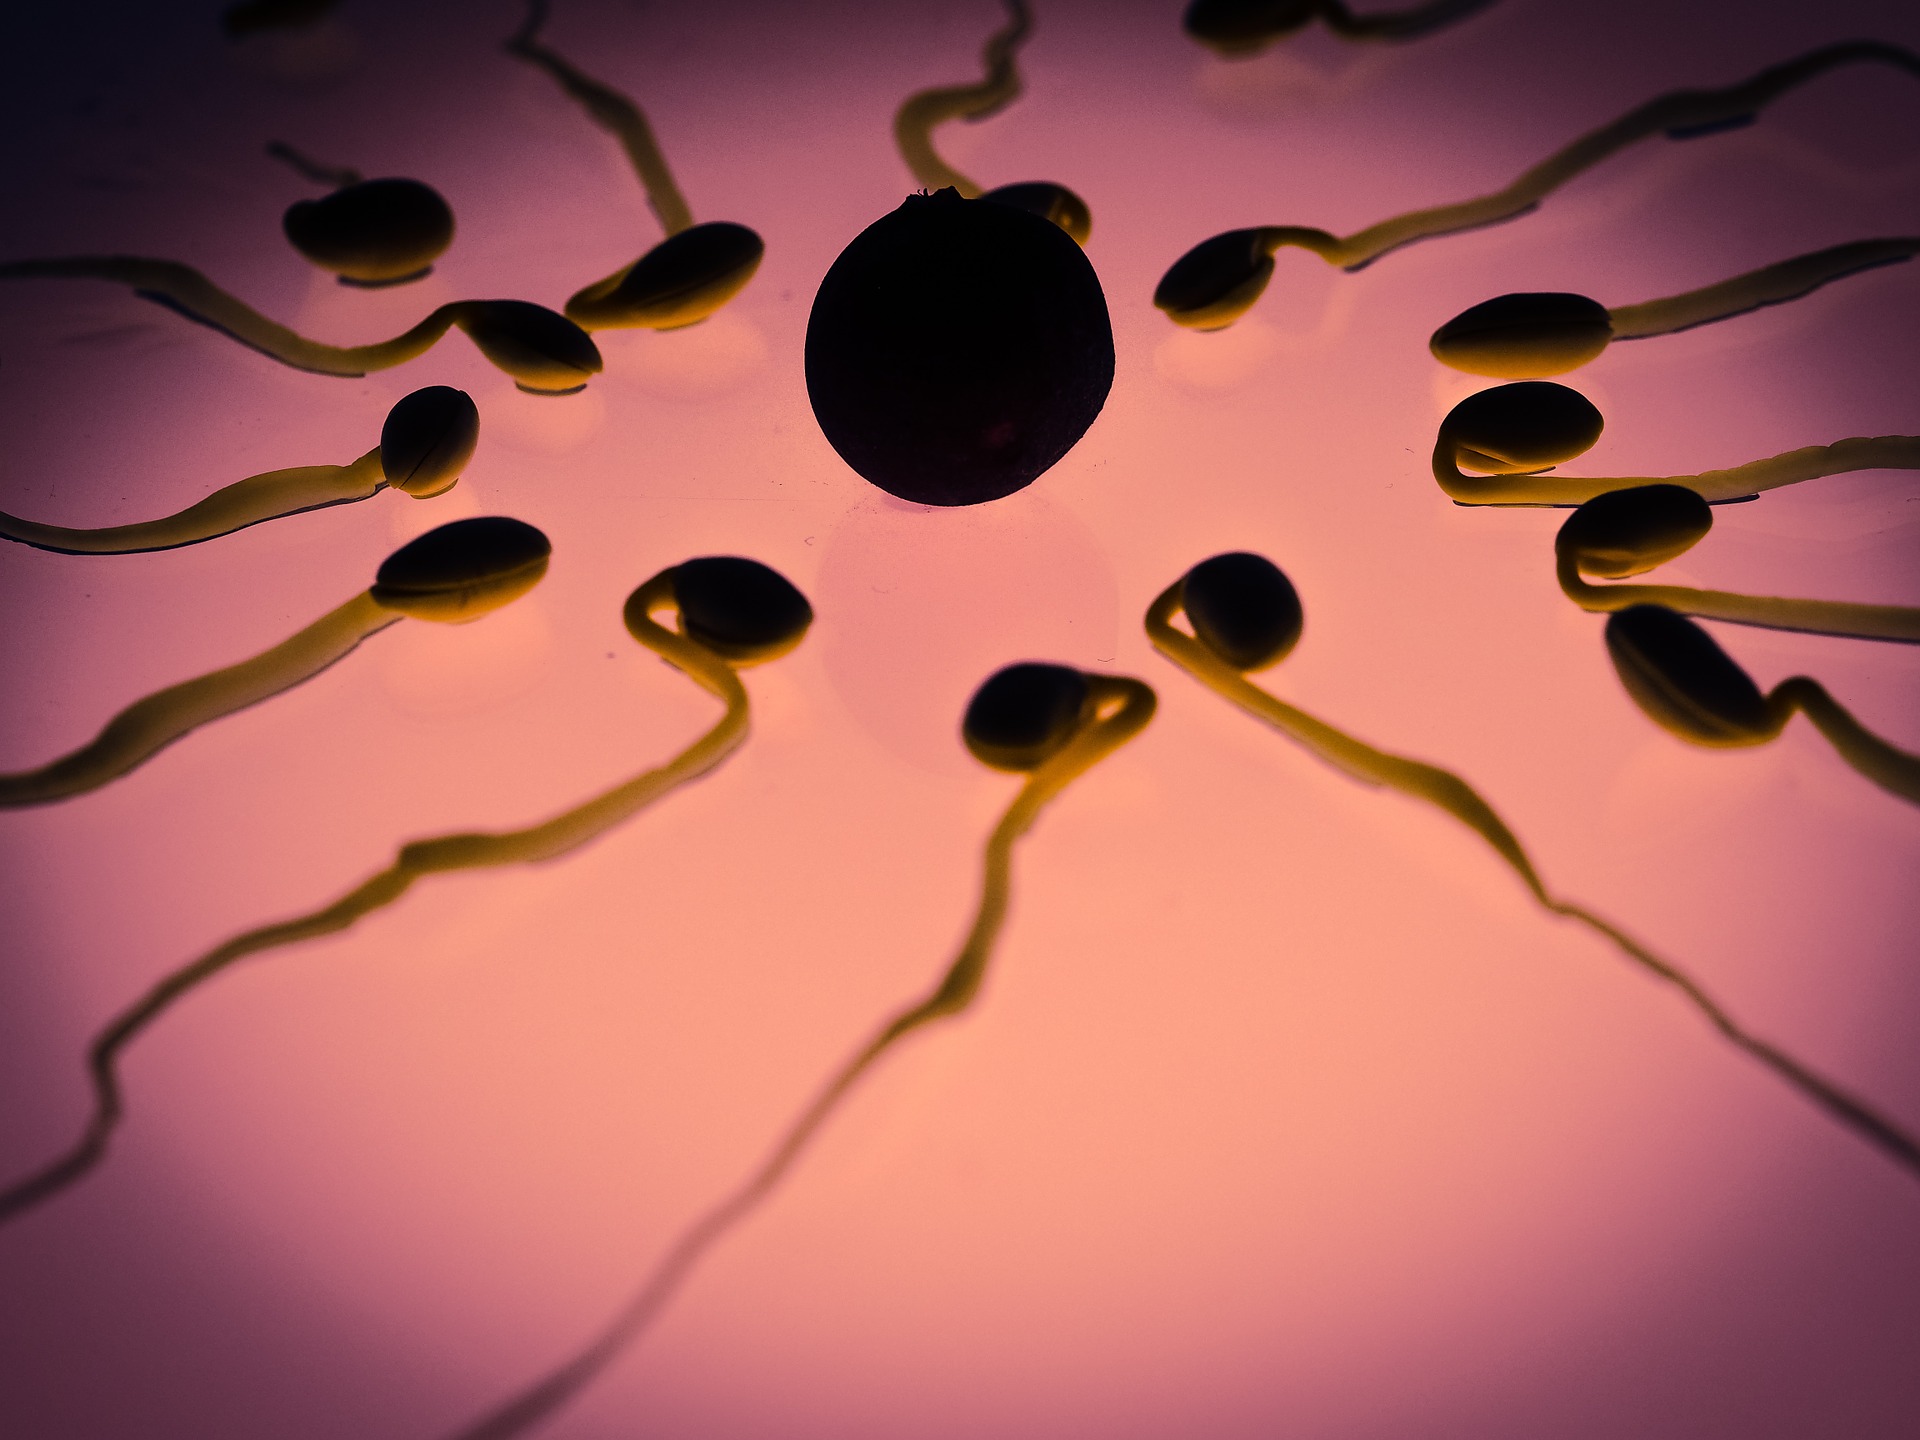 They denounce a sperm donor who could have fathered more than 550 children